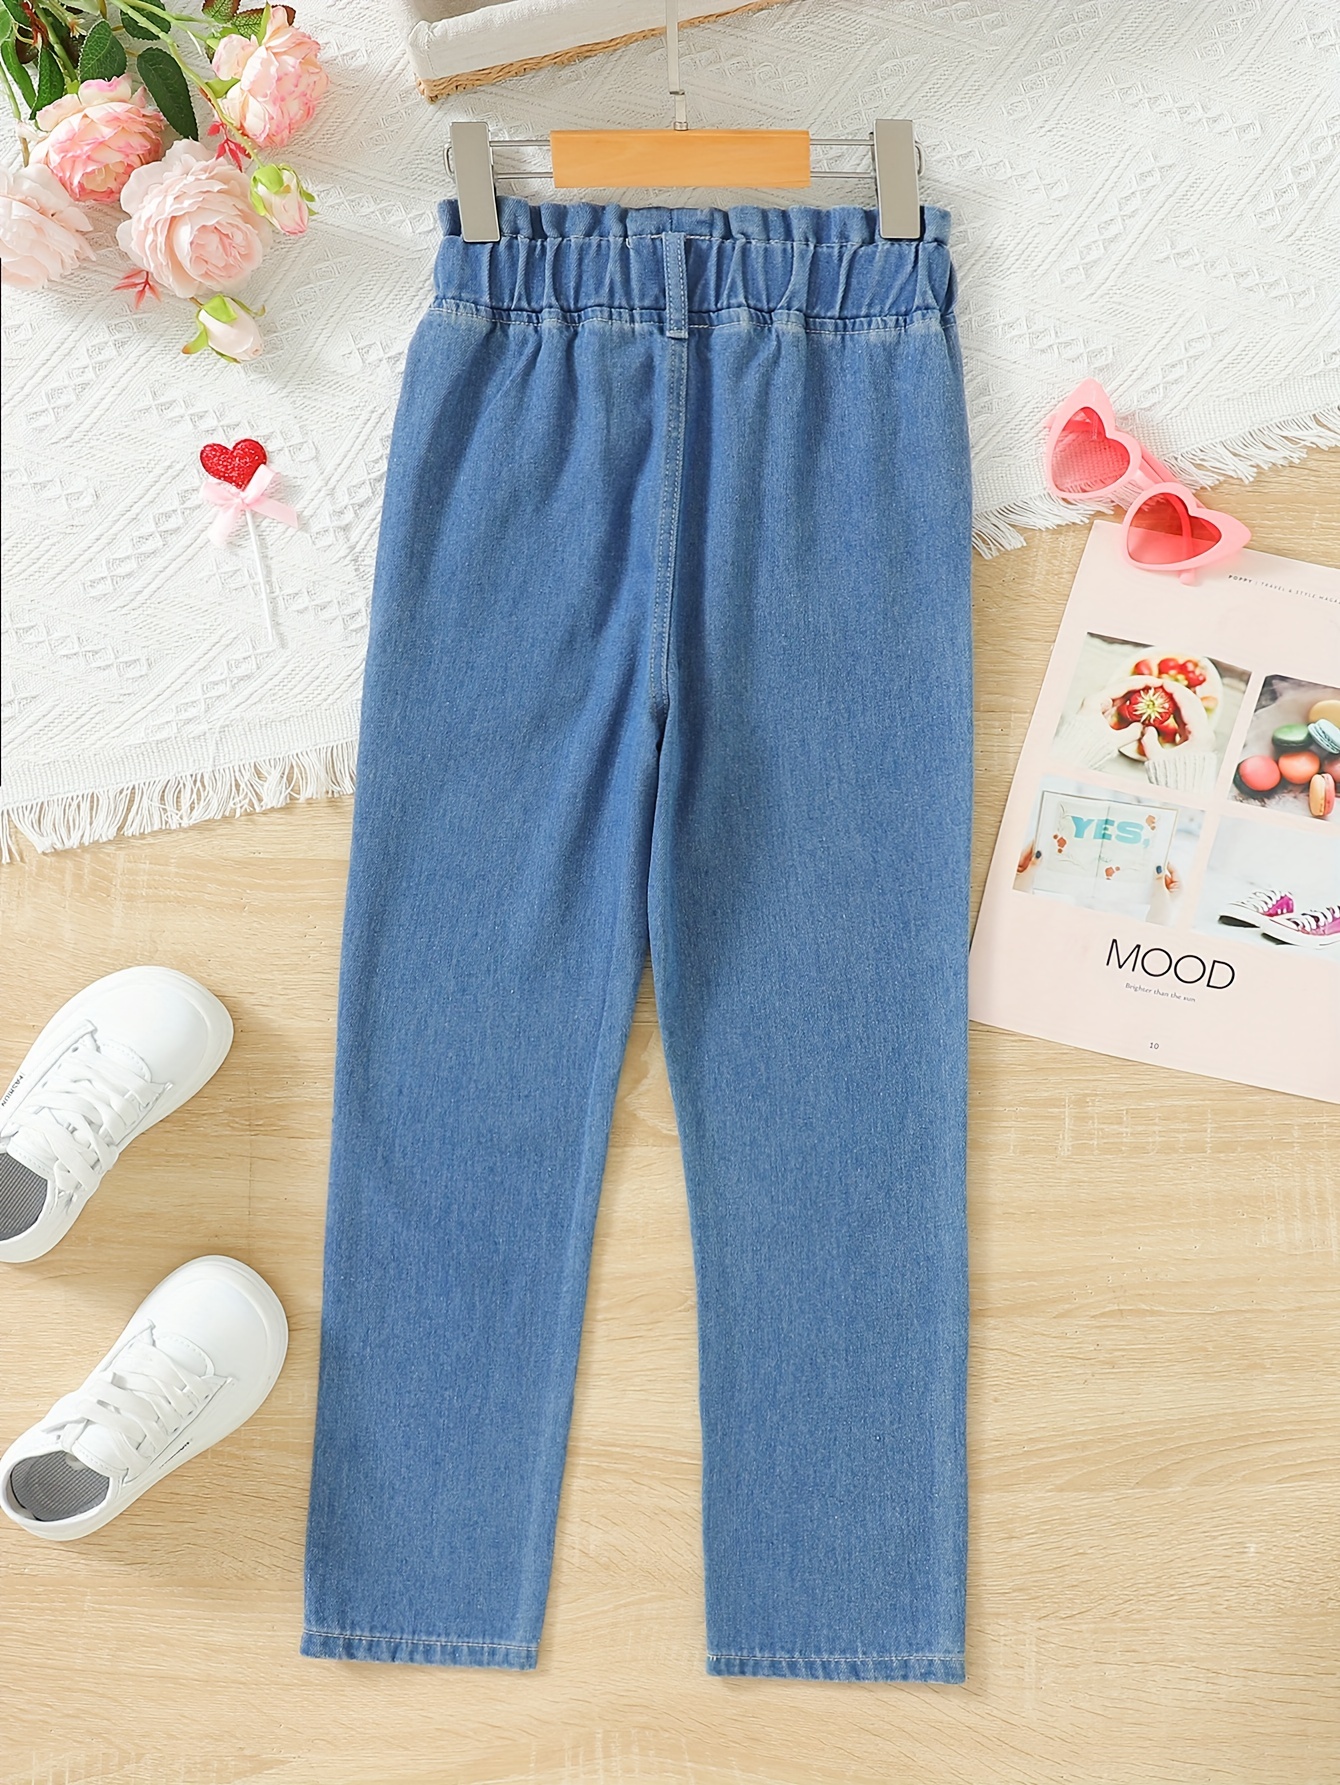 Girls Cartoon Embroidered Jeans Cute Kids Casual Denim Pants For Spring And  Autumn